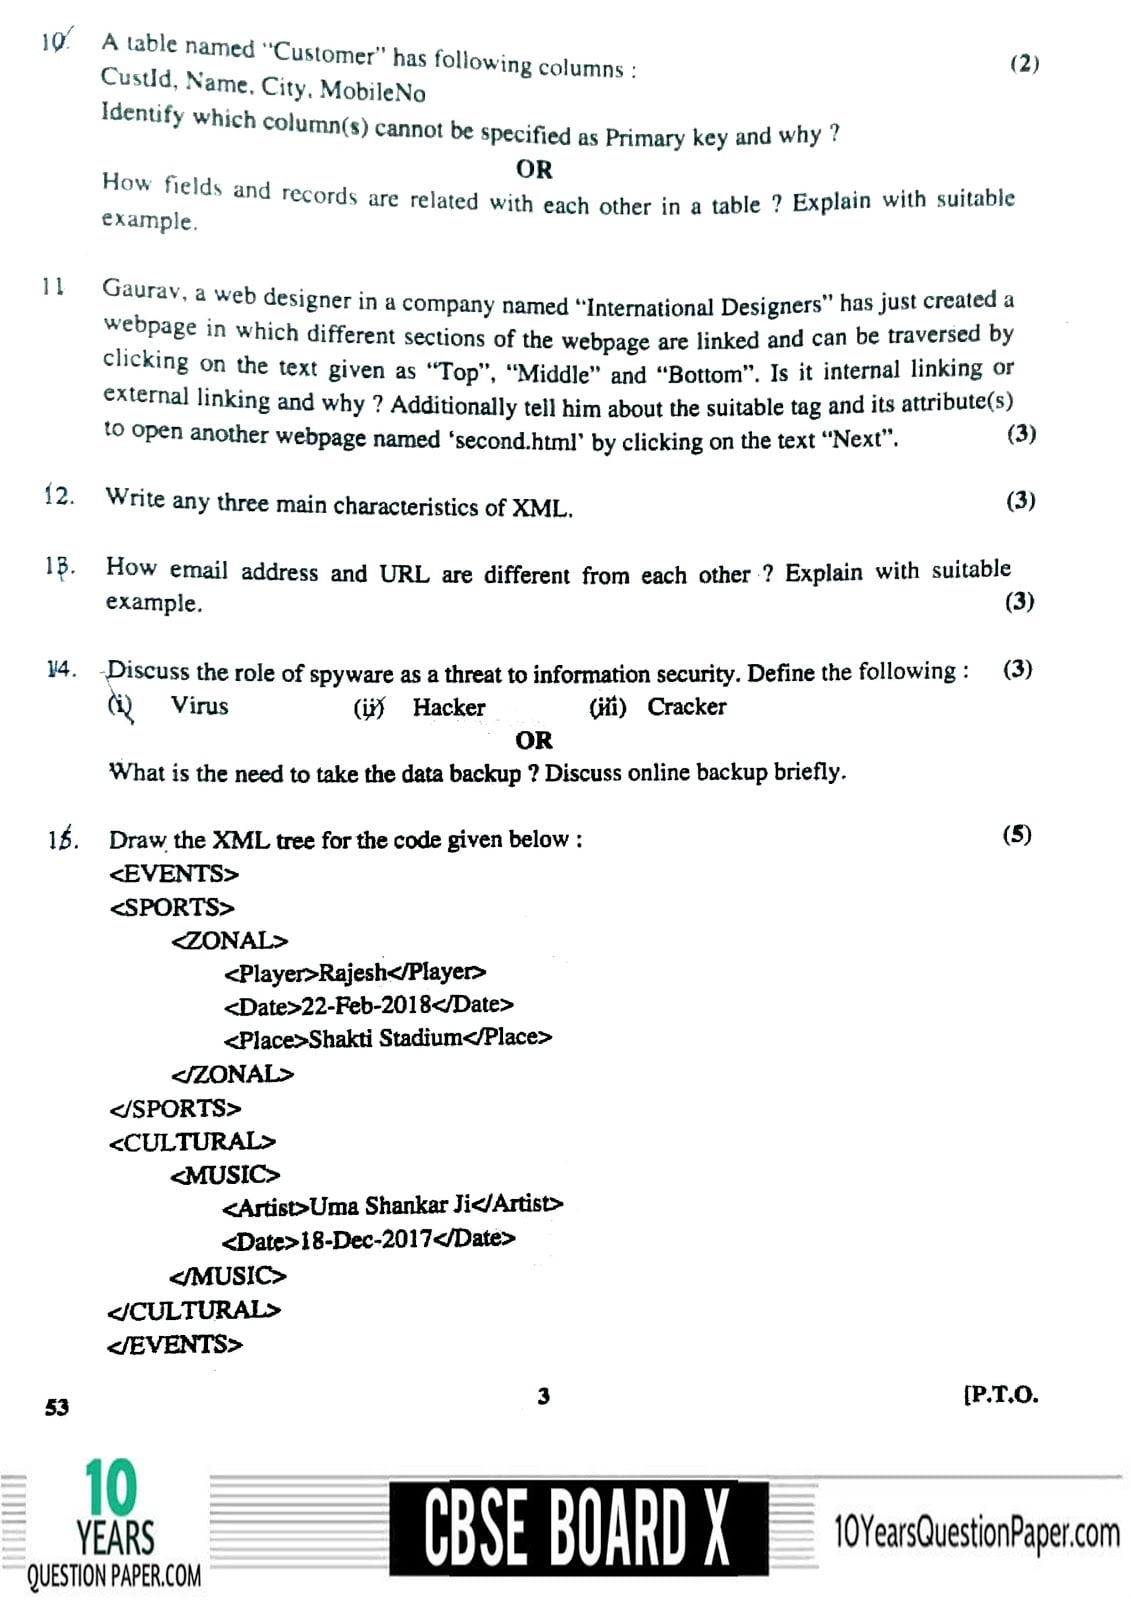 CBSE Class 10 Foundation of Information Technology 2018 Question Paper